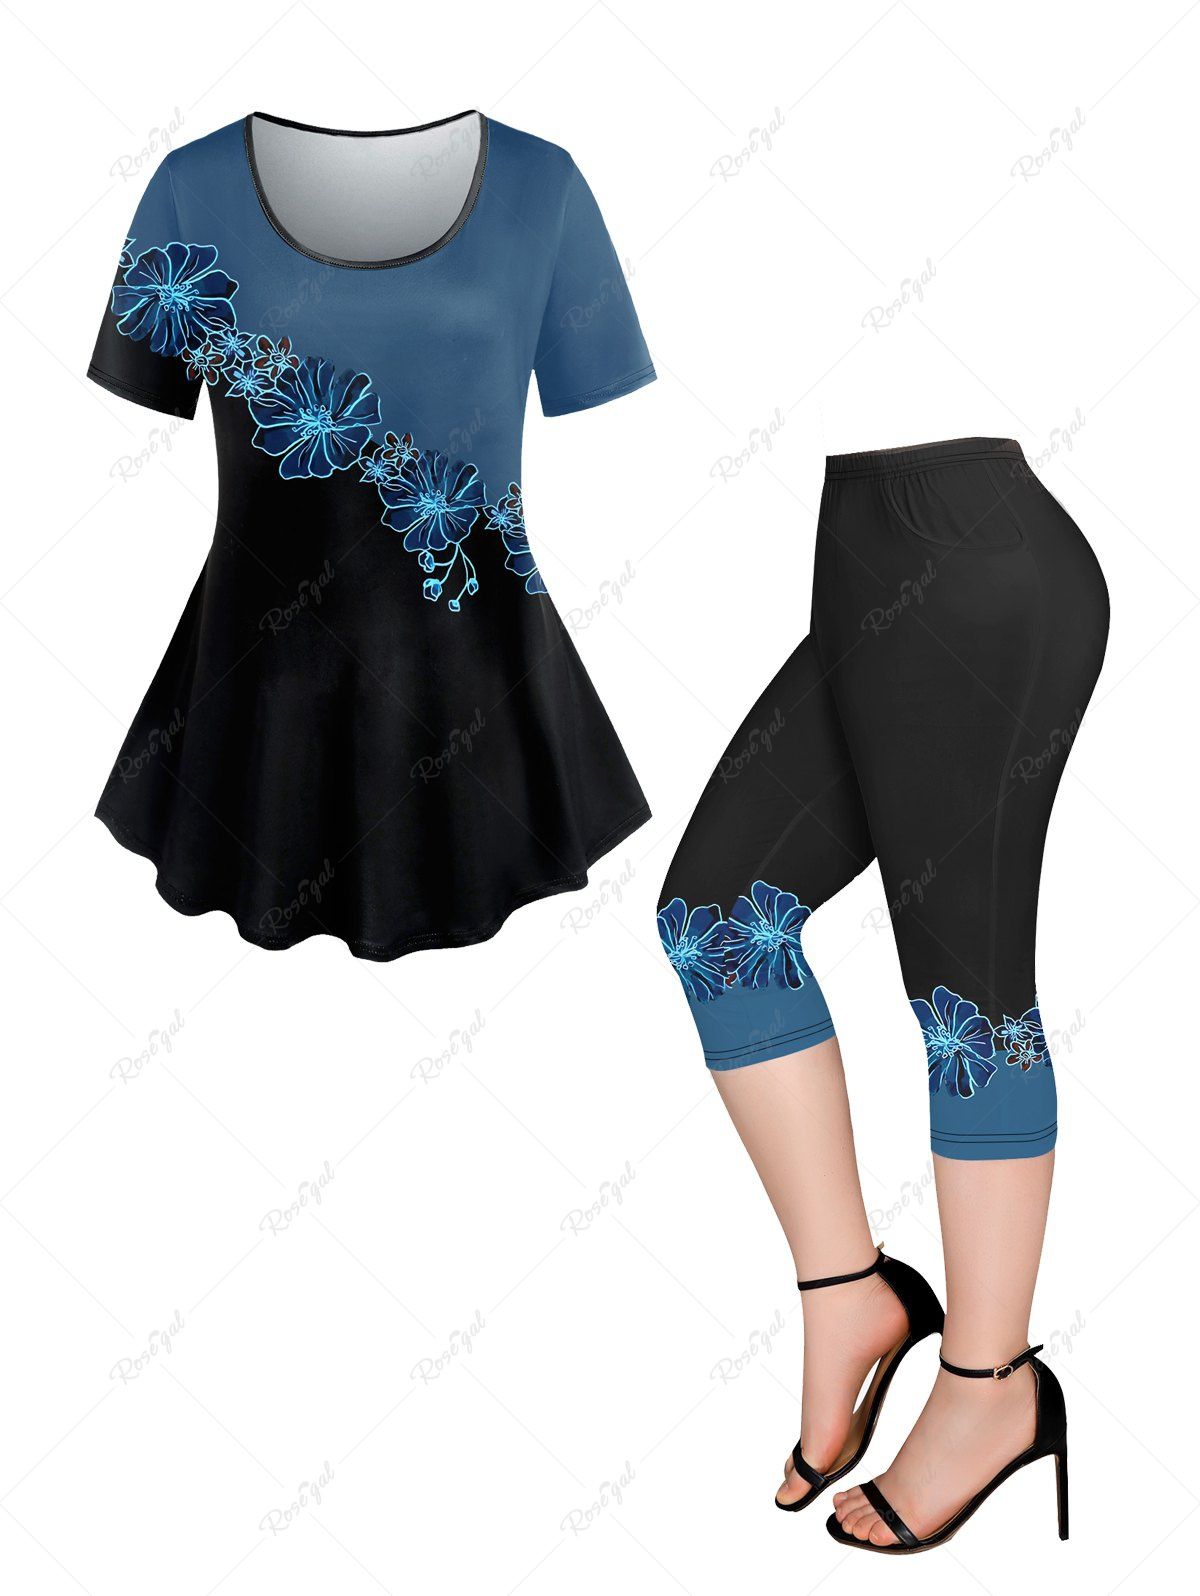 New Colorblock Flower Print Short Sleeves T-shirt and Capri Leggings Plus Size Outfits  